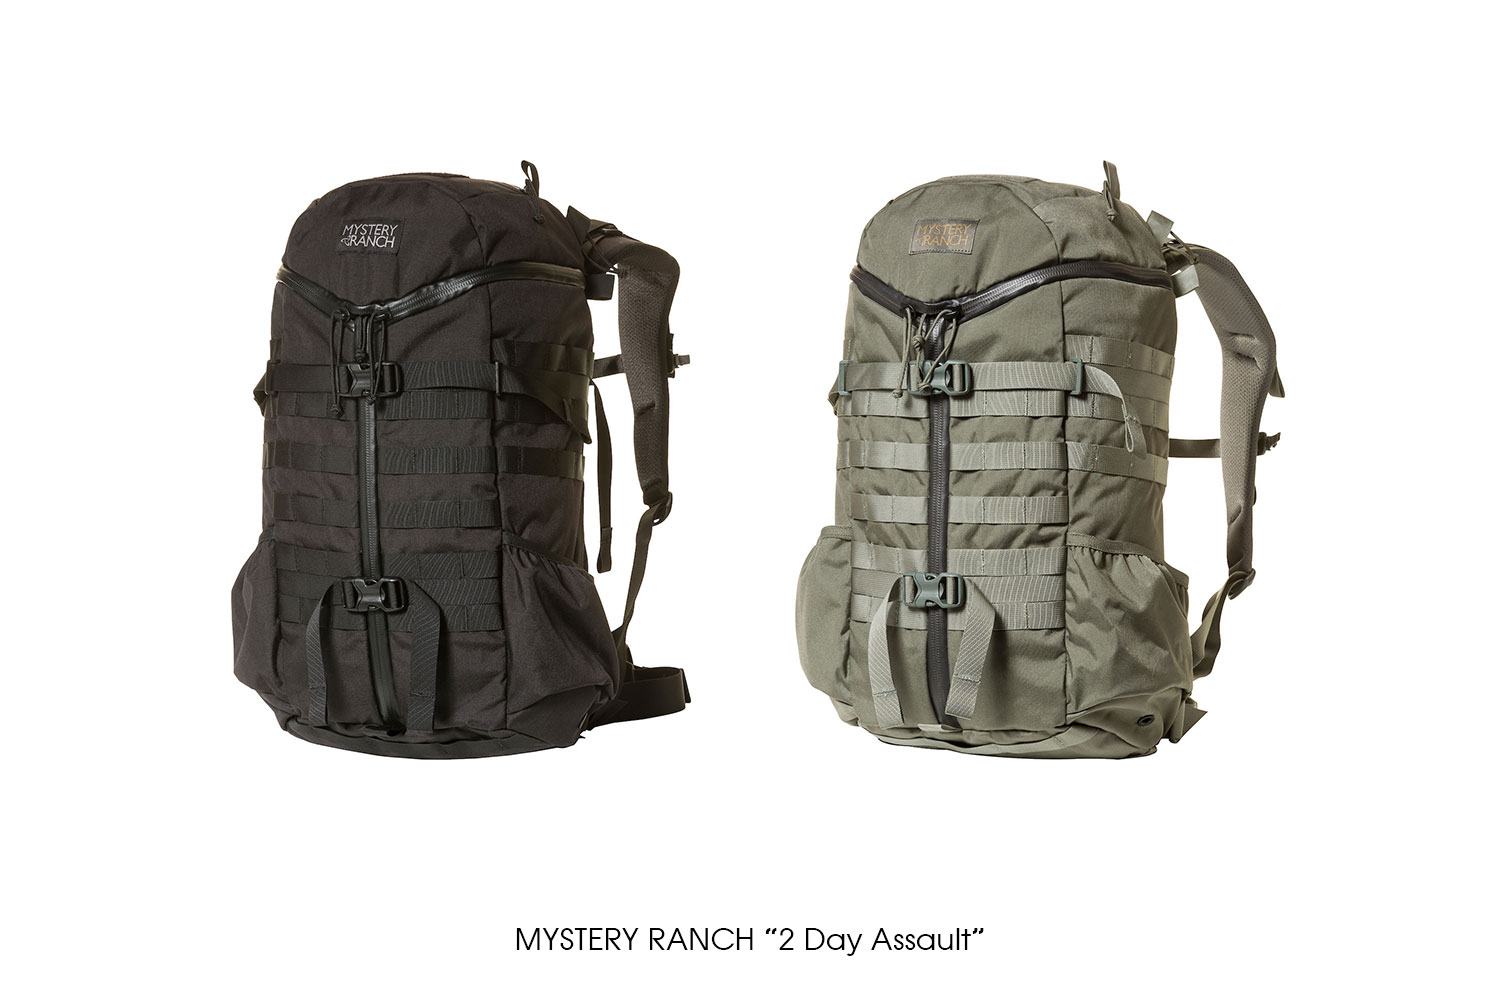 MYSTERY RANCH "2 Day Assault"